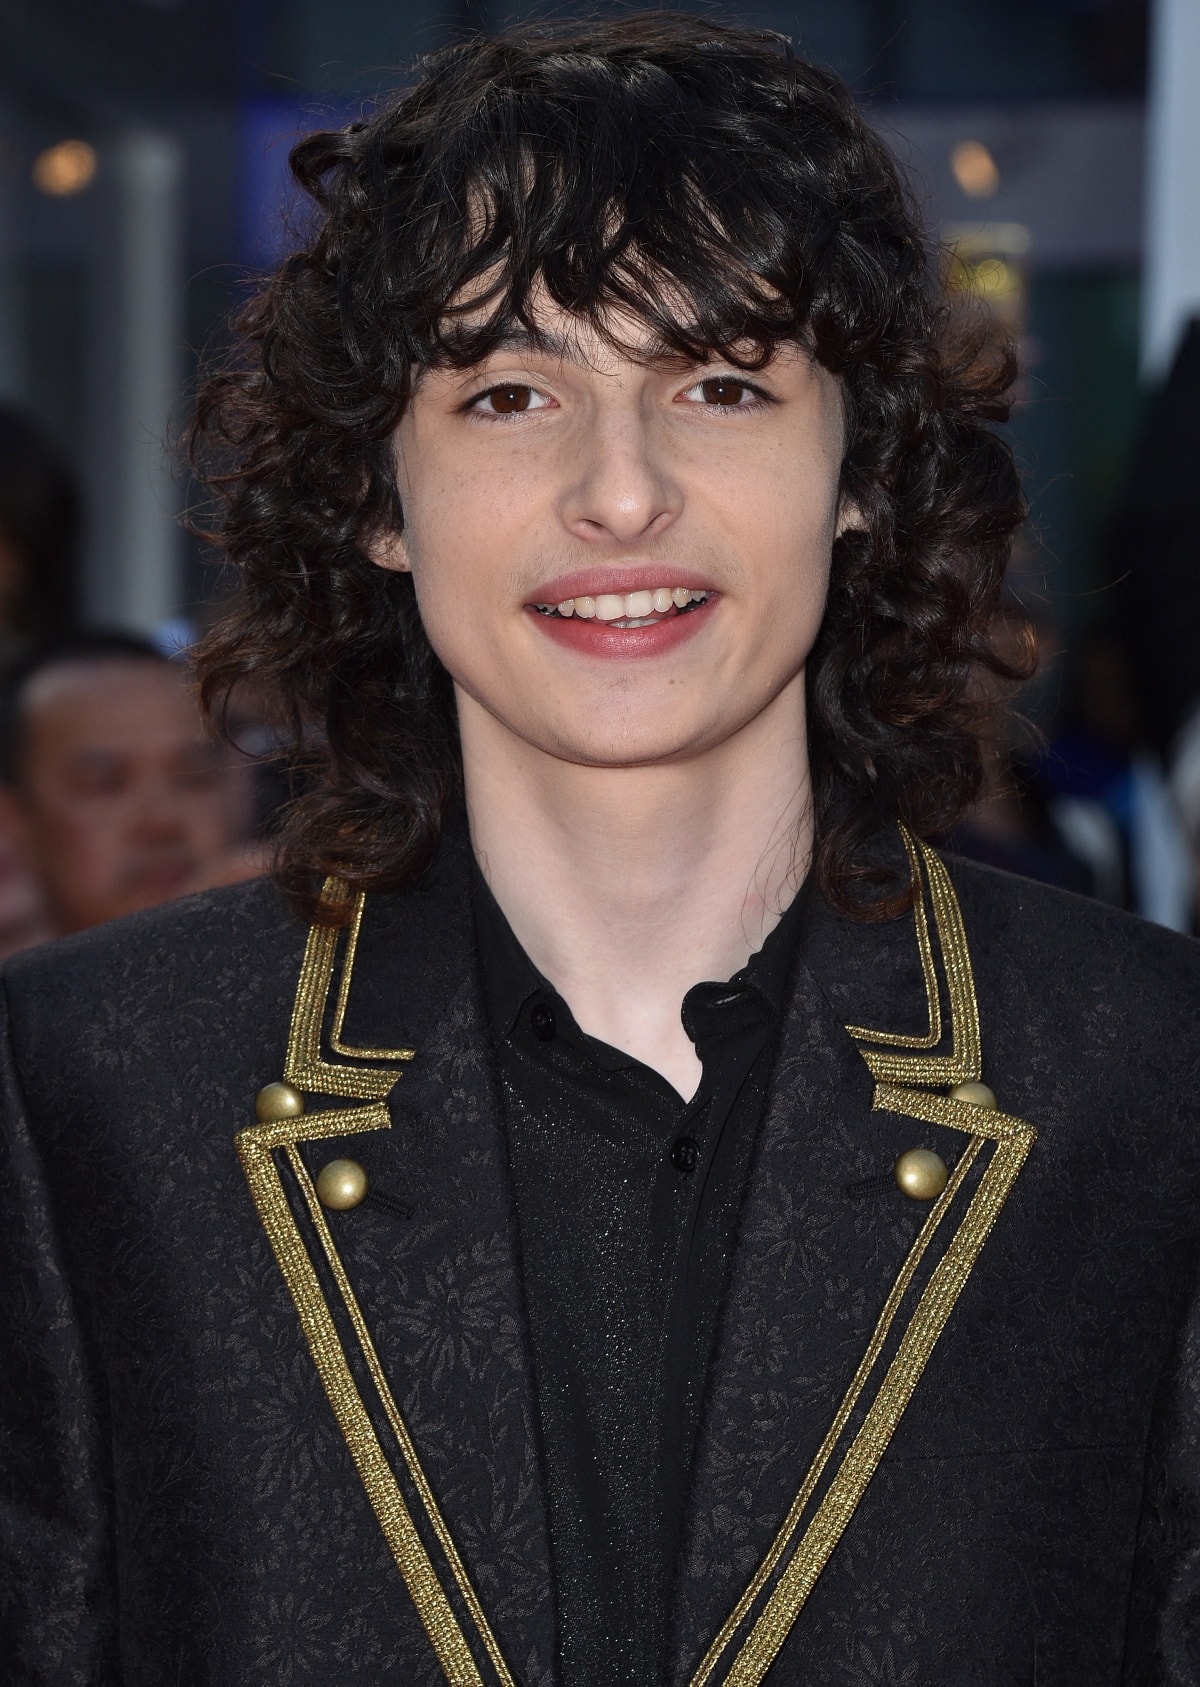 Finn Wolfhard attending the premiere of The Goldfinch during the 2019 Toronto International Film Festival